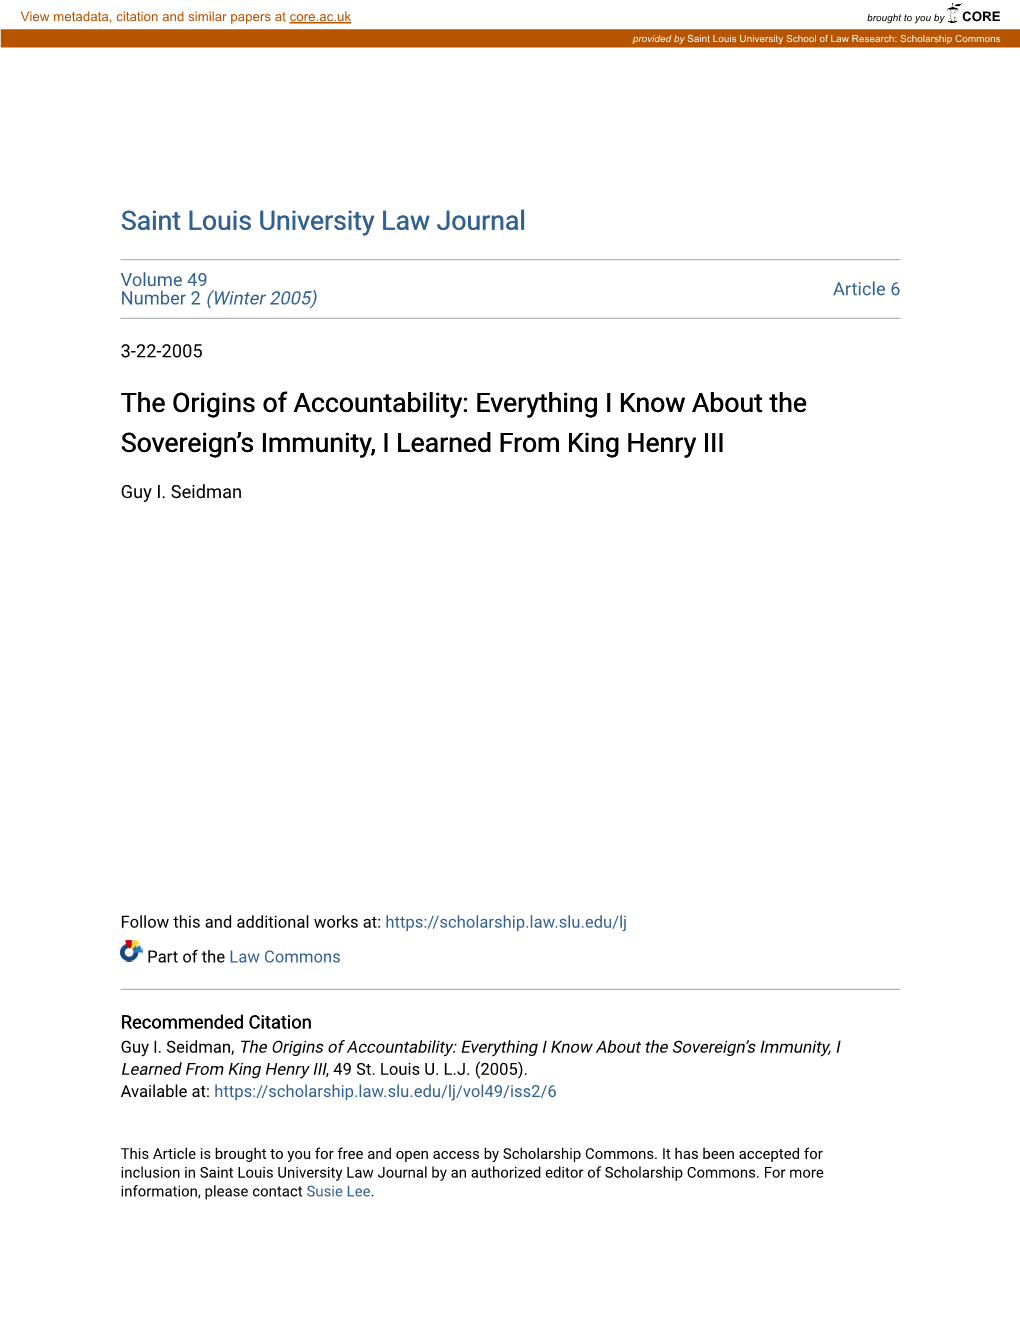 The Origins of Accountability: Everything I Know About the Sovereign's Immunity, I Learned from King Henry